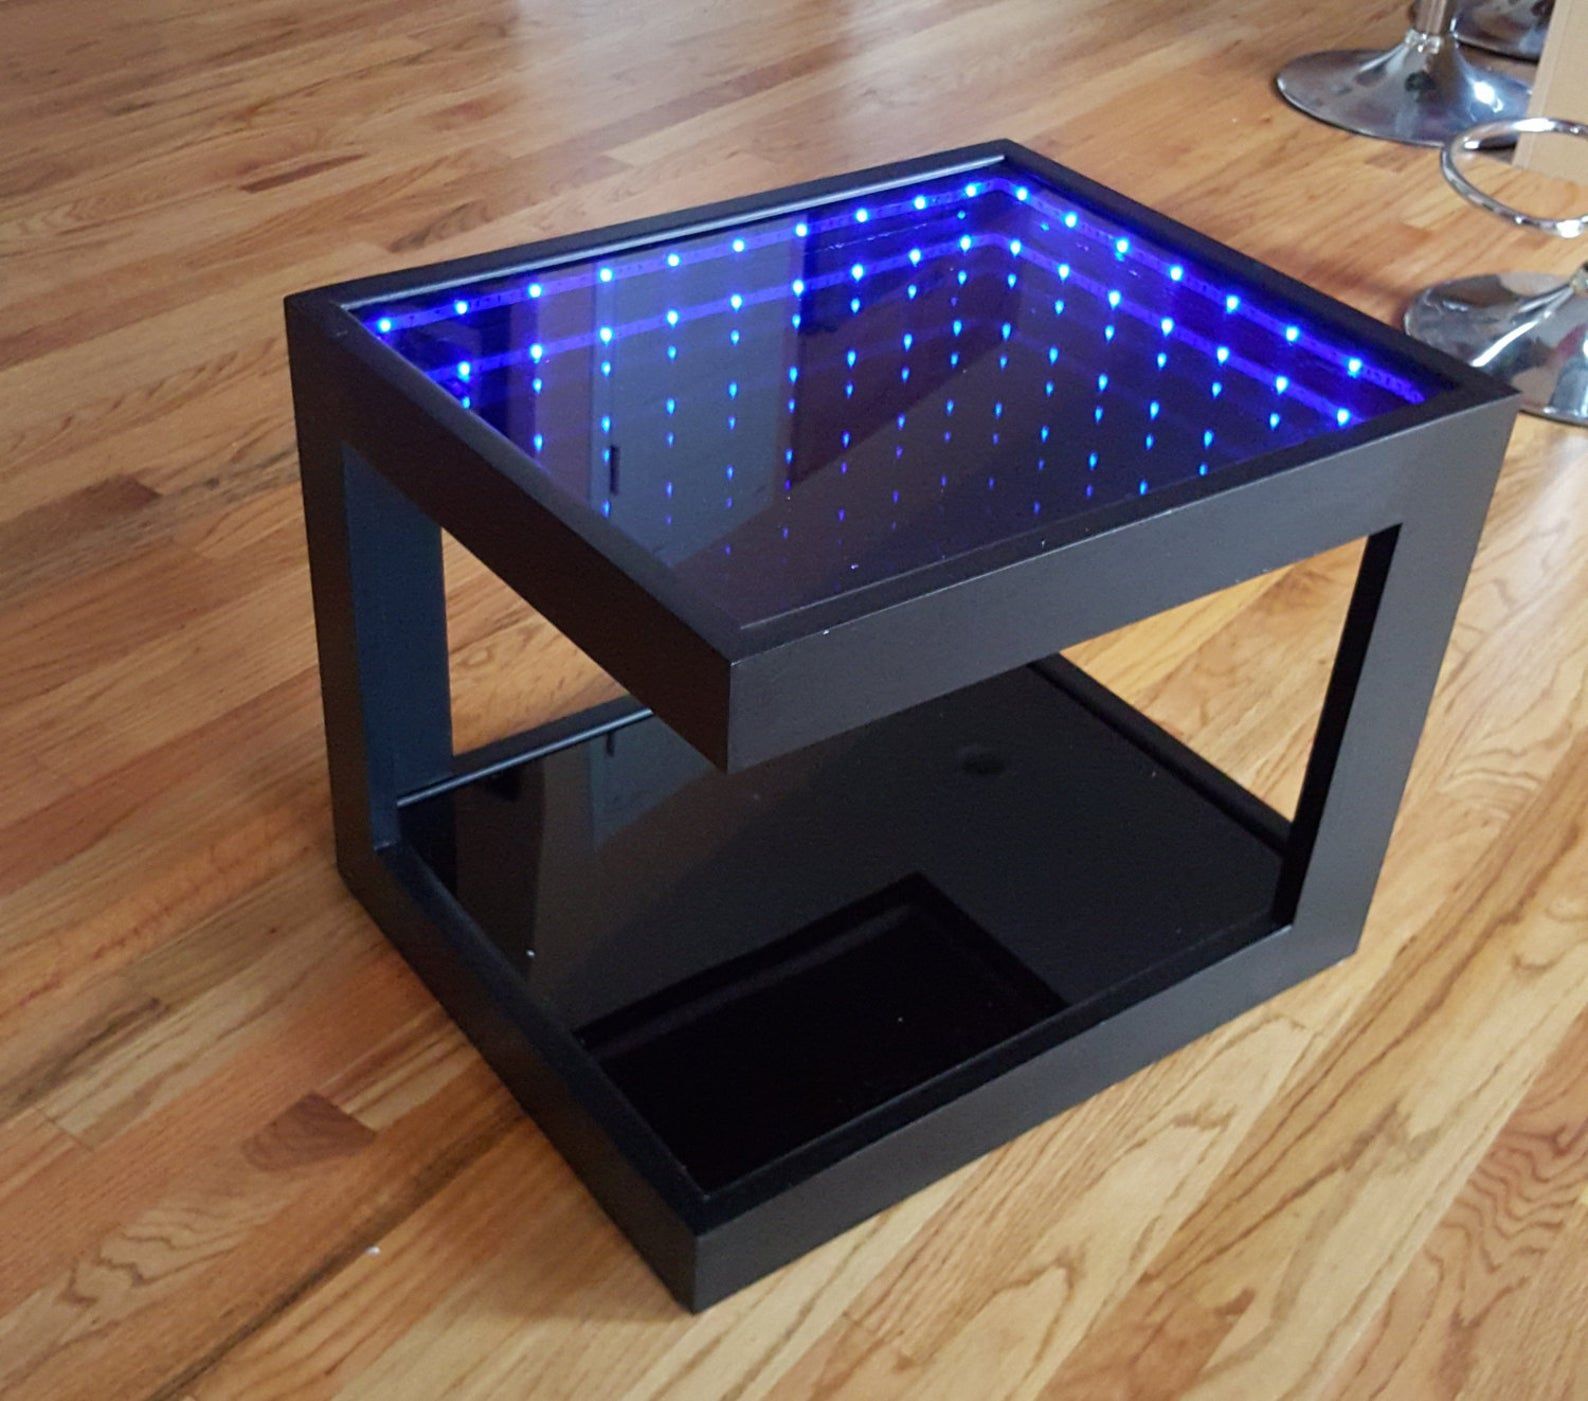 Black Coffee Table With Cool Illusion Lights Featuring | Etsy In 2021 With Coffee Tables With Drawers And Led Lights (Gallery 18 of 20)